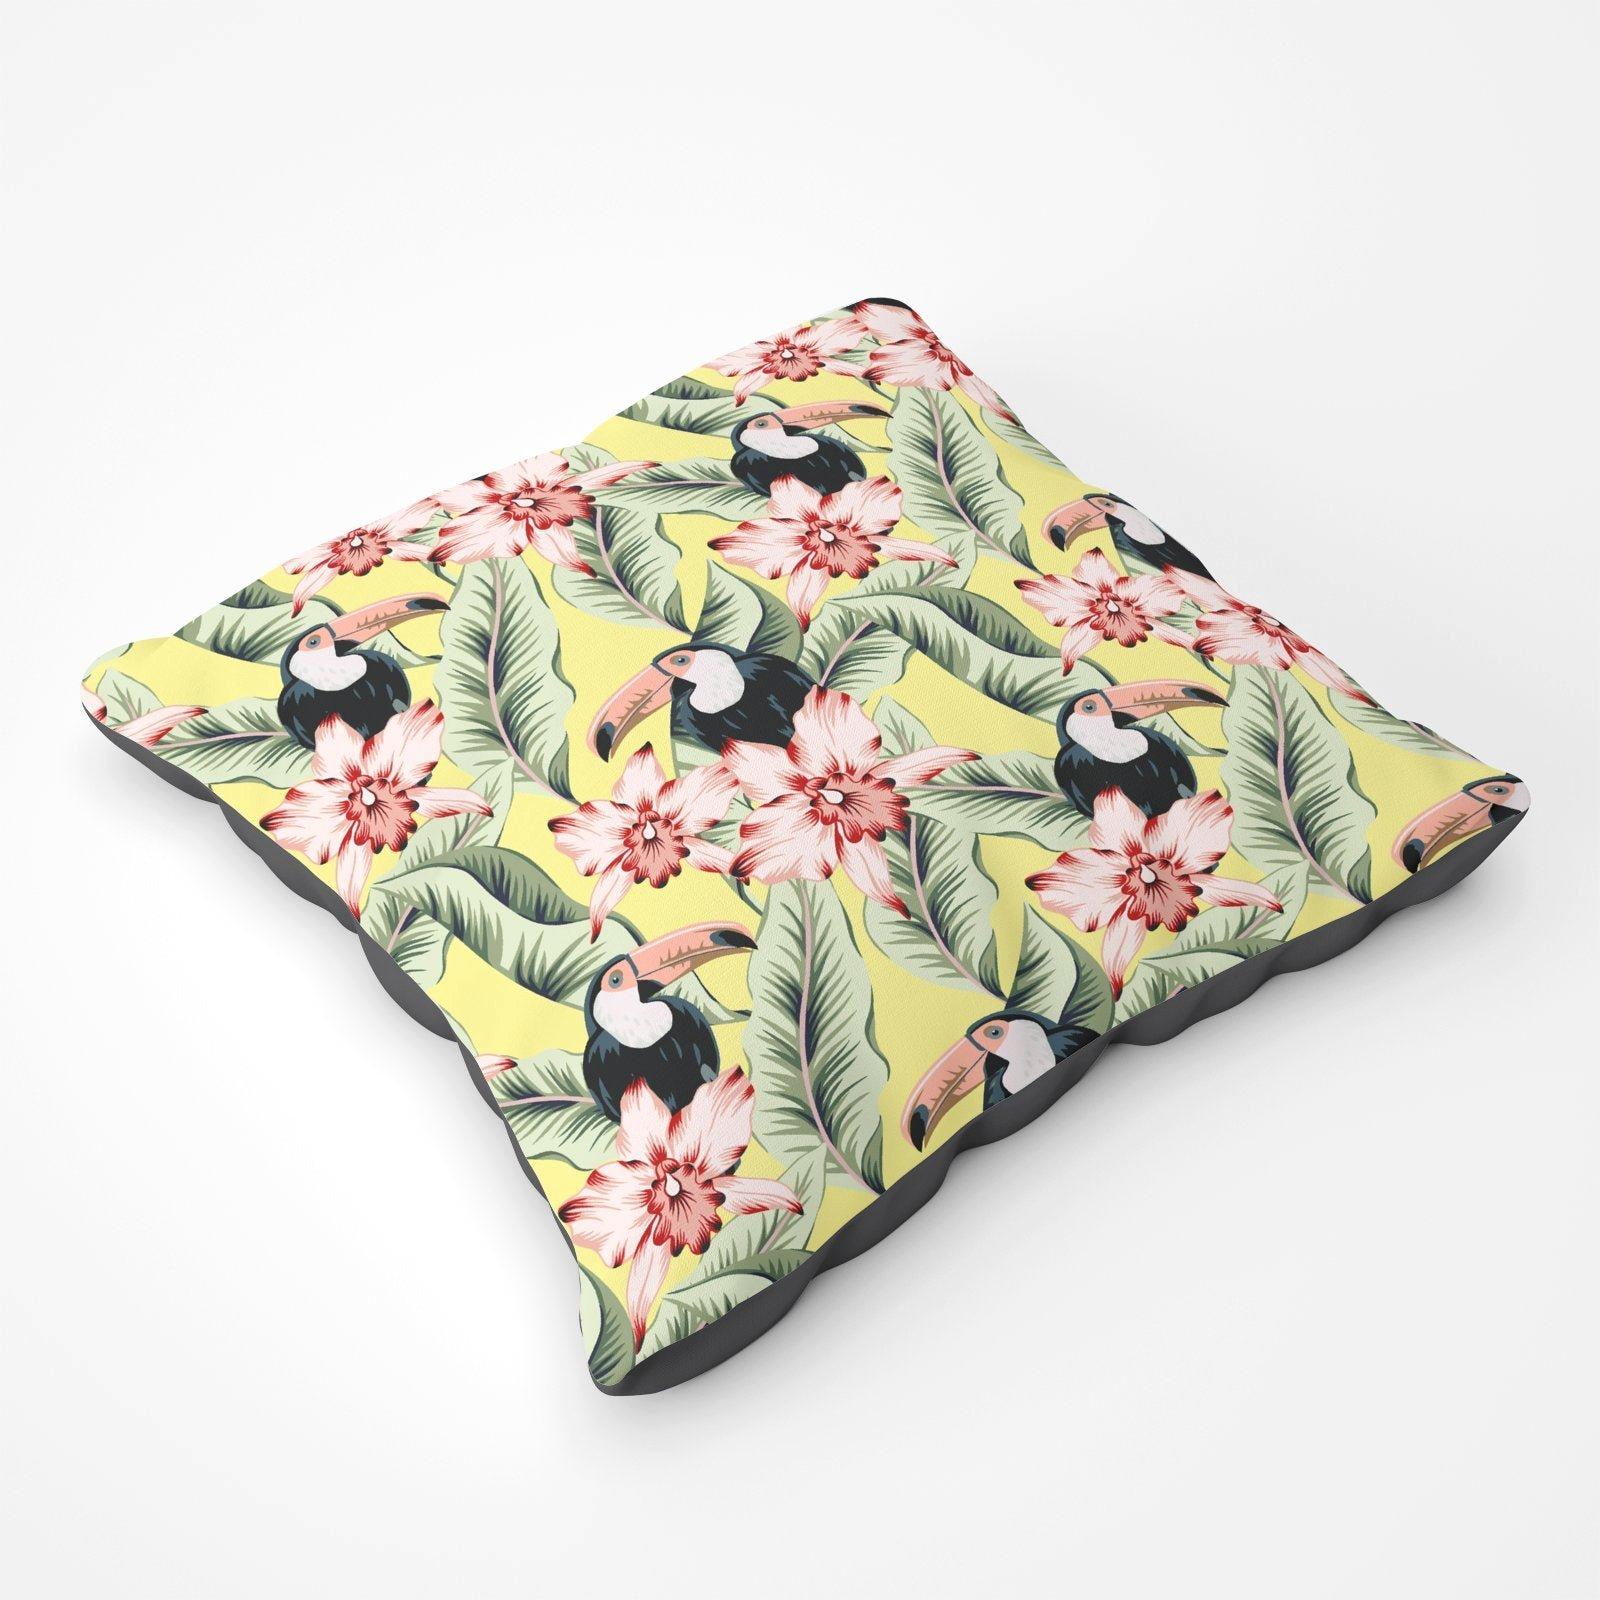 Toucans, Orchids And Palm Leaves Floor Cushion